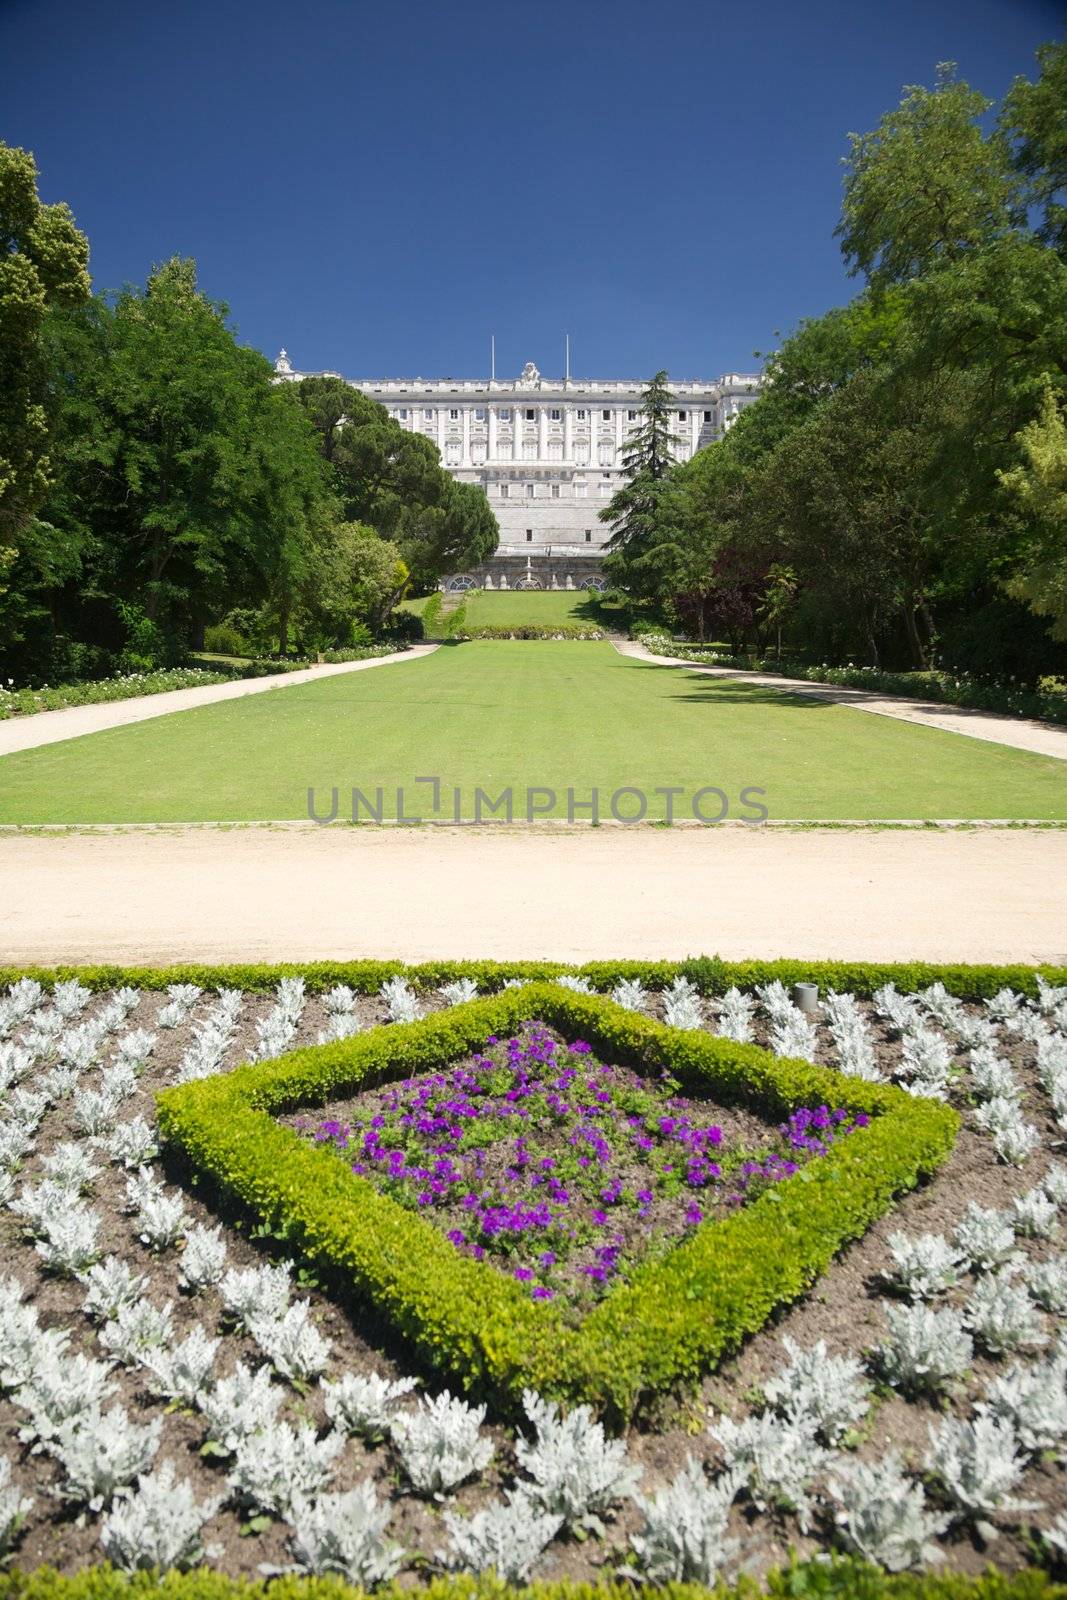 public garden free access next to Royal palace at Madrid Spain